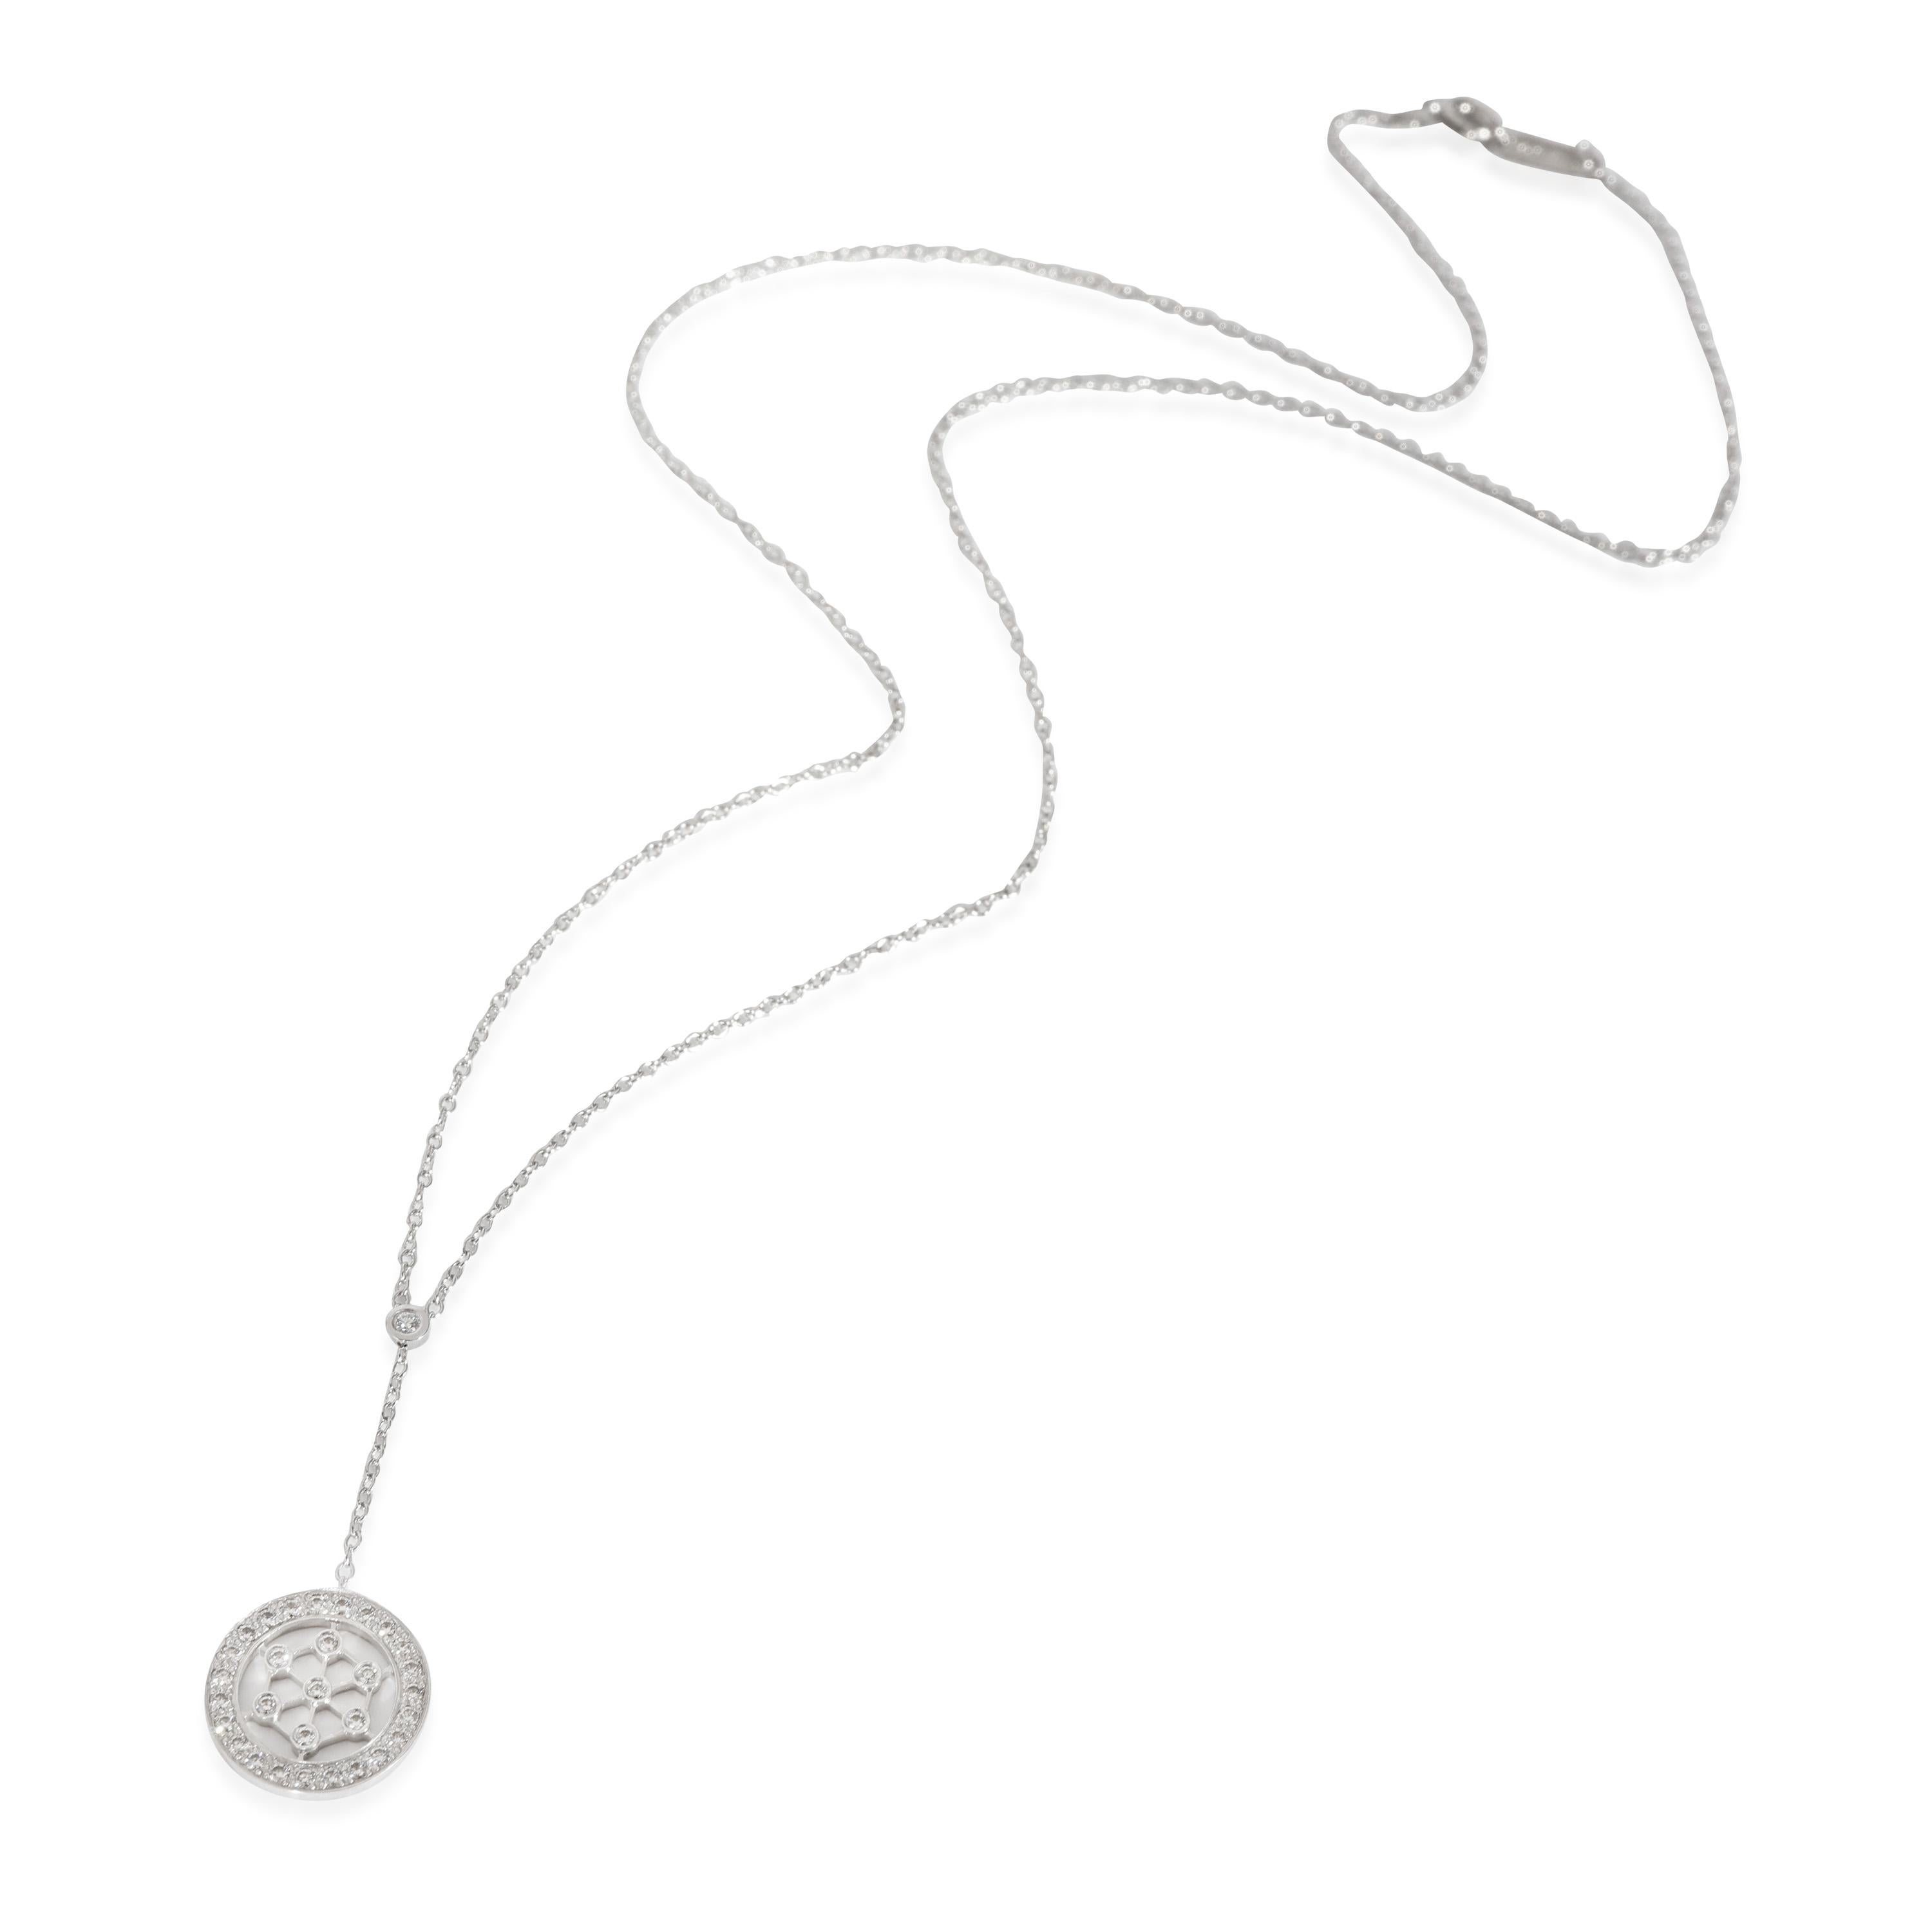 Tiffany & Co. Voile Diamond Lariat Pendant  in  Platinum 0.1 CTW

PRIMARY DETAILS
SKU: 131734
Listing Title: Tiffany & Co. Voile Diamond Lariat Pendant  in  Platinum 0.1 CTW
Condition Description: Retails for 2100 USD. In excellent condition and